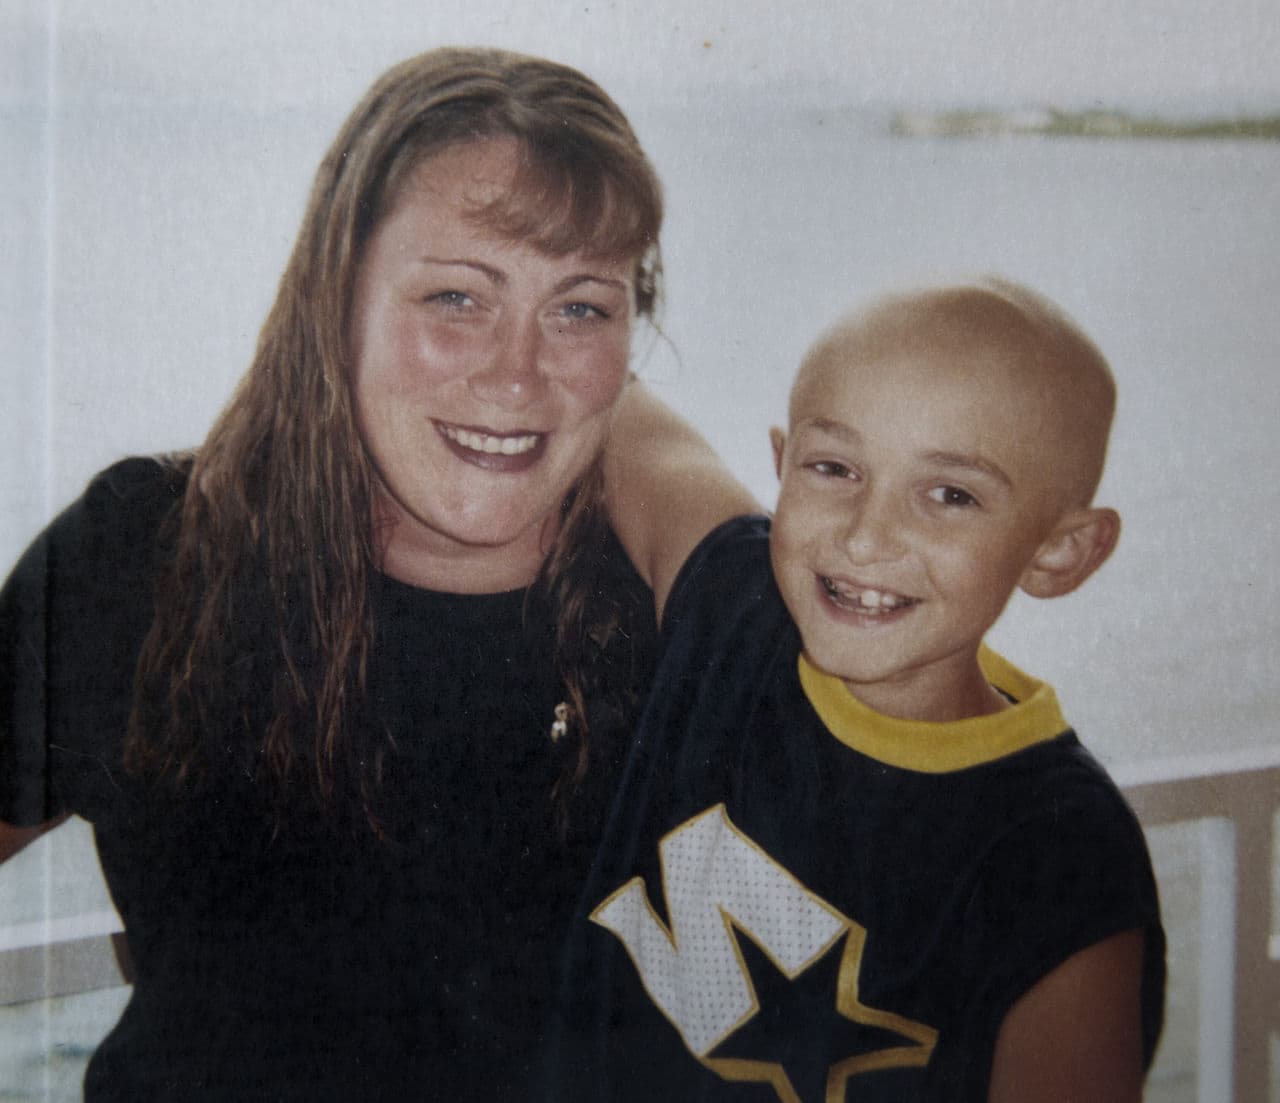 Rosemary and Nick Jensen in 2001, a few months after they learned that he had relapsed (Courtesy)